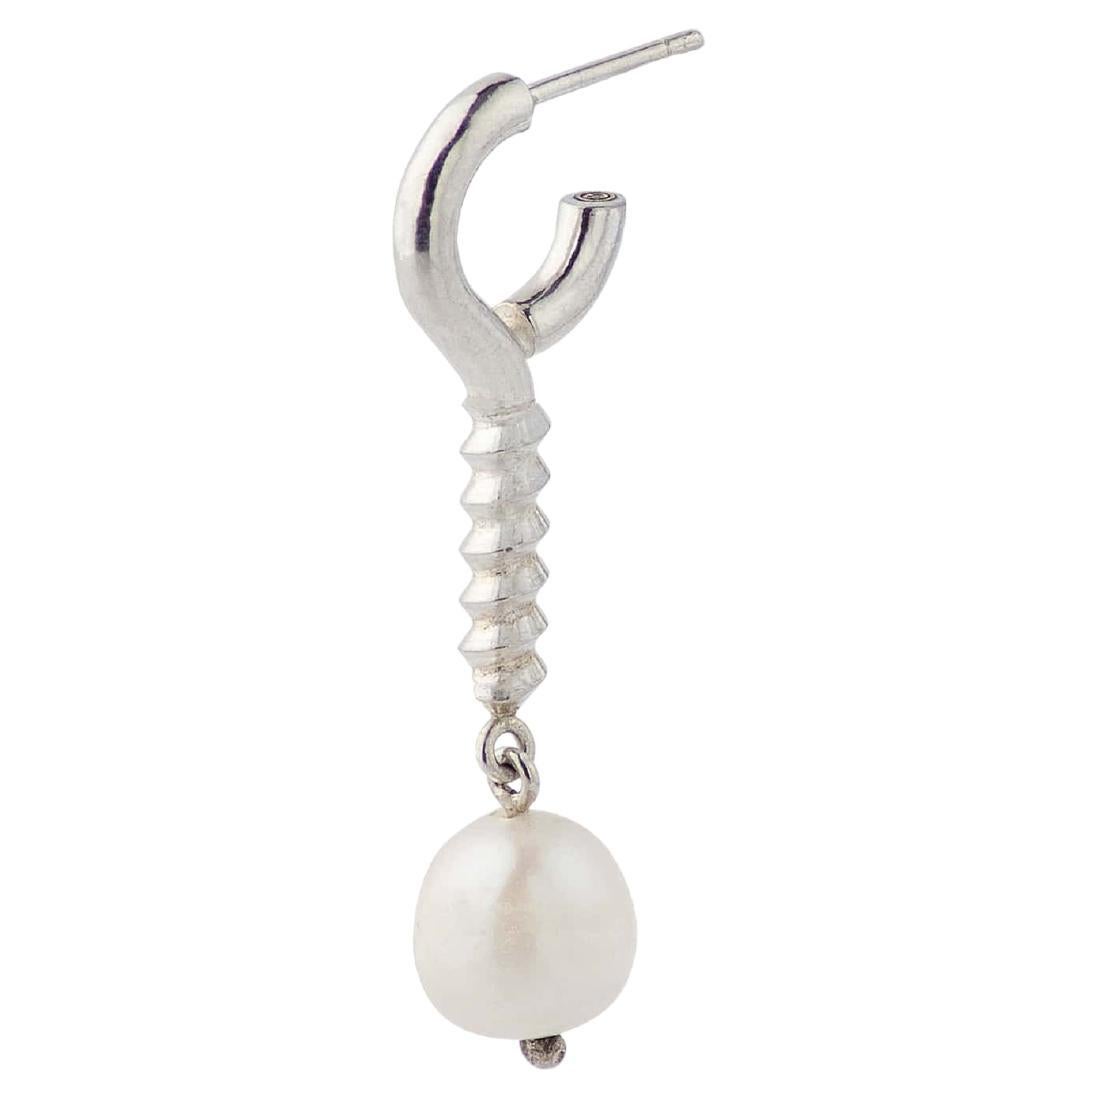 Sterling Silver Eye Hook Shape Individual Earring with Hanging Freshwate Pearl For Sale